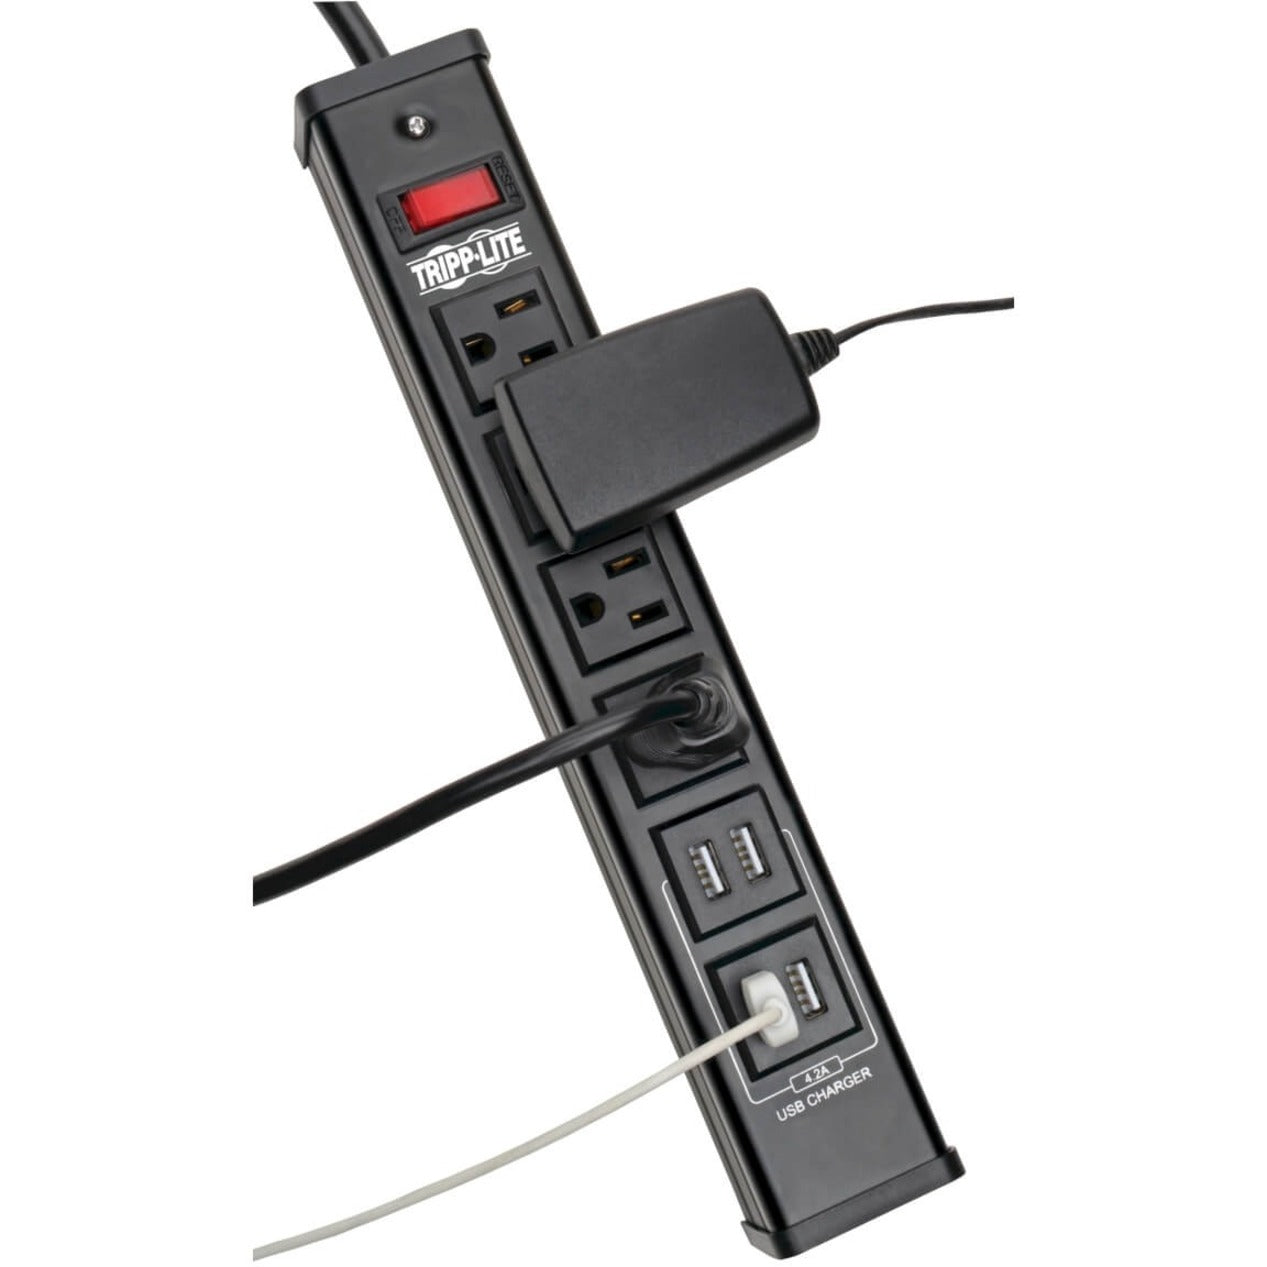 Tripp Lite TLM446USBB Protect It! 4-Outlet Surge Suppressor/Protector, USB Charging Ports, 450 Joules